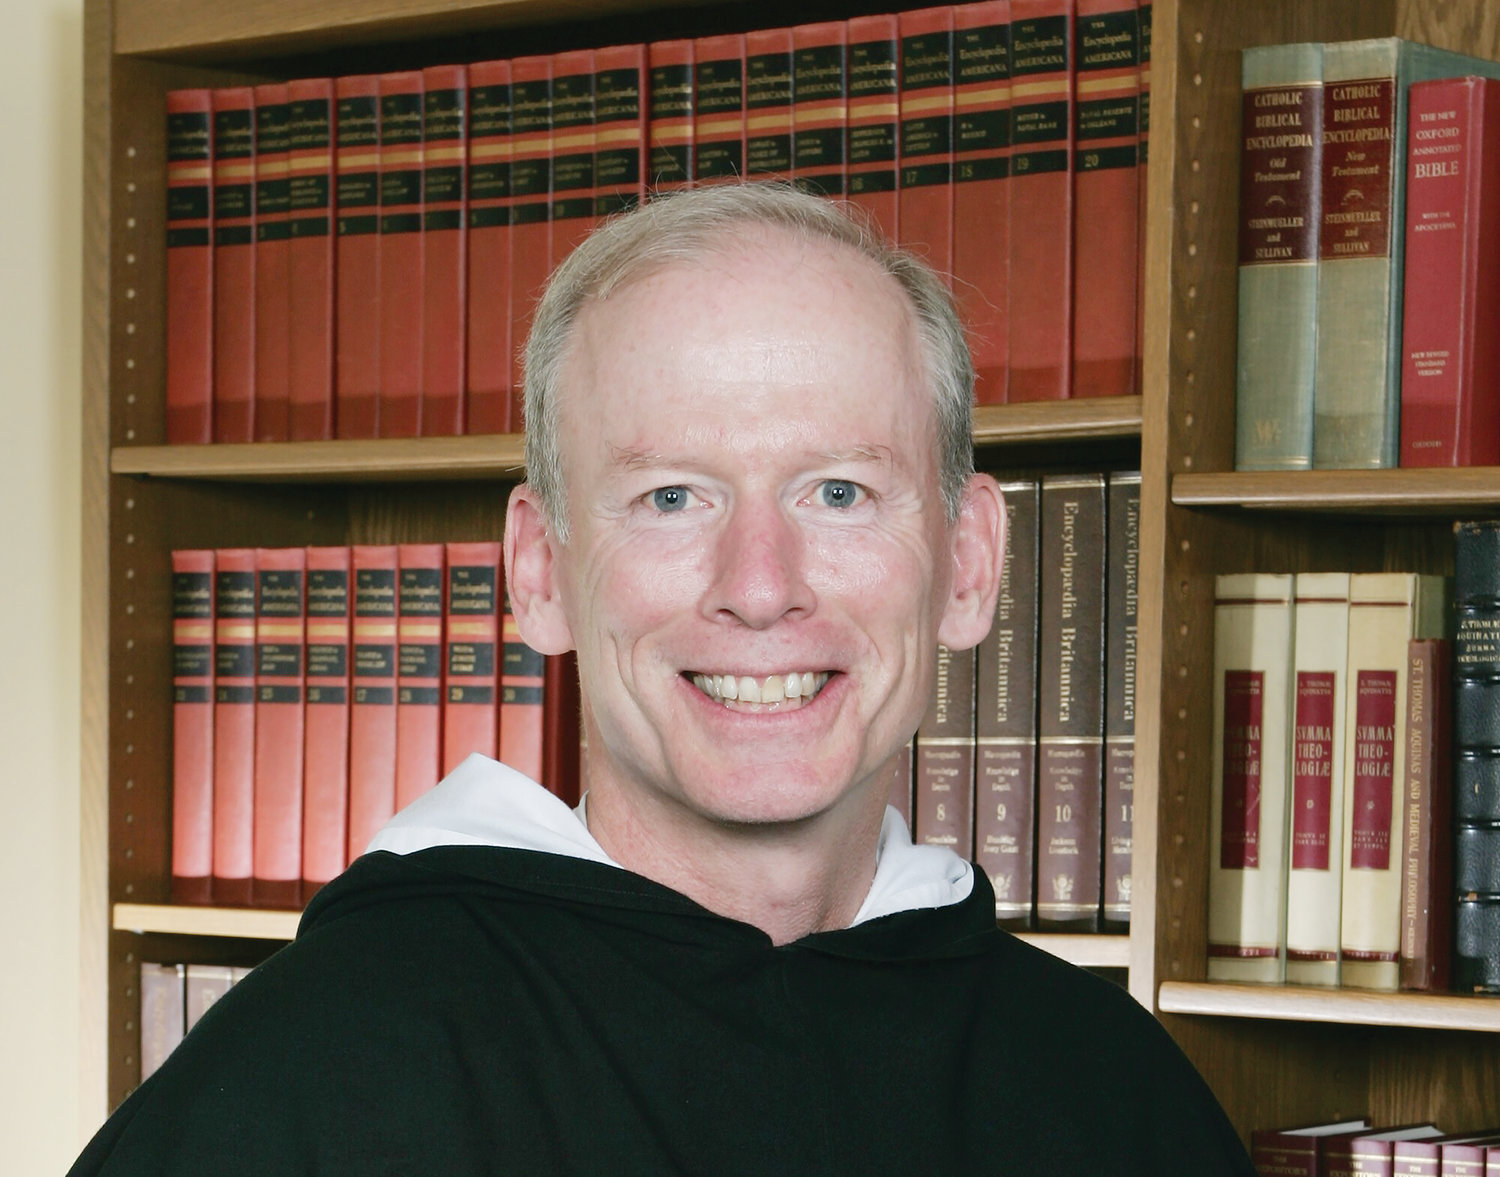 Father Brian Shanley, who has served Providence College as president for the past 15 years, will step down from the presidency at the end of the month.